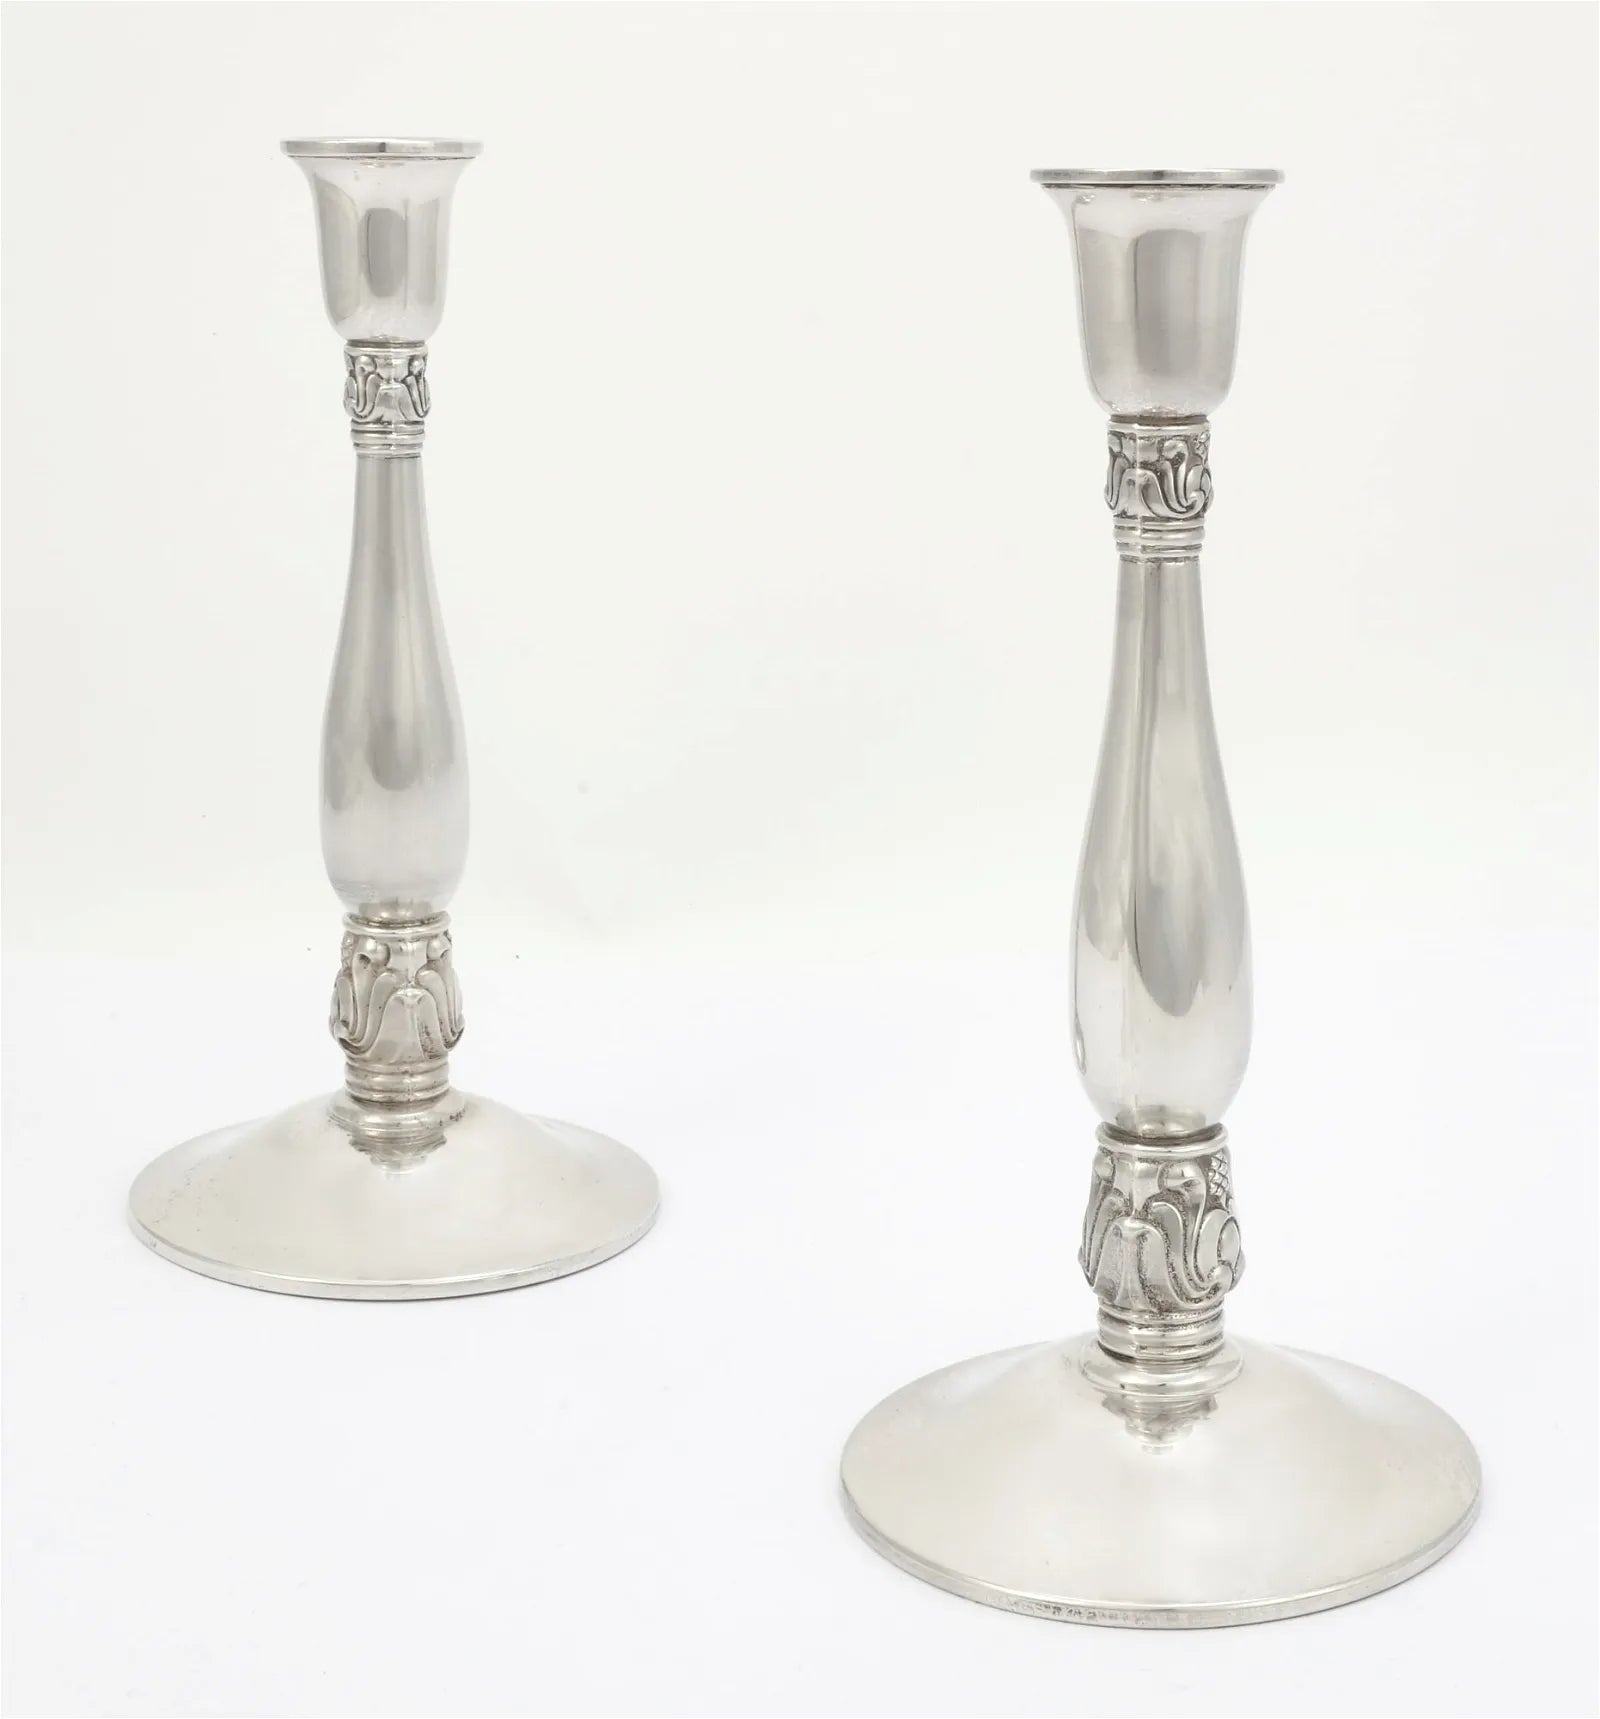 DA2-018: Pair of International Silver Weighted Sterling Silver Royal Danish Candlesticks mid 20th Century